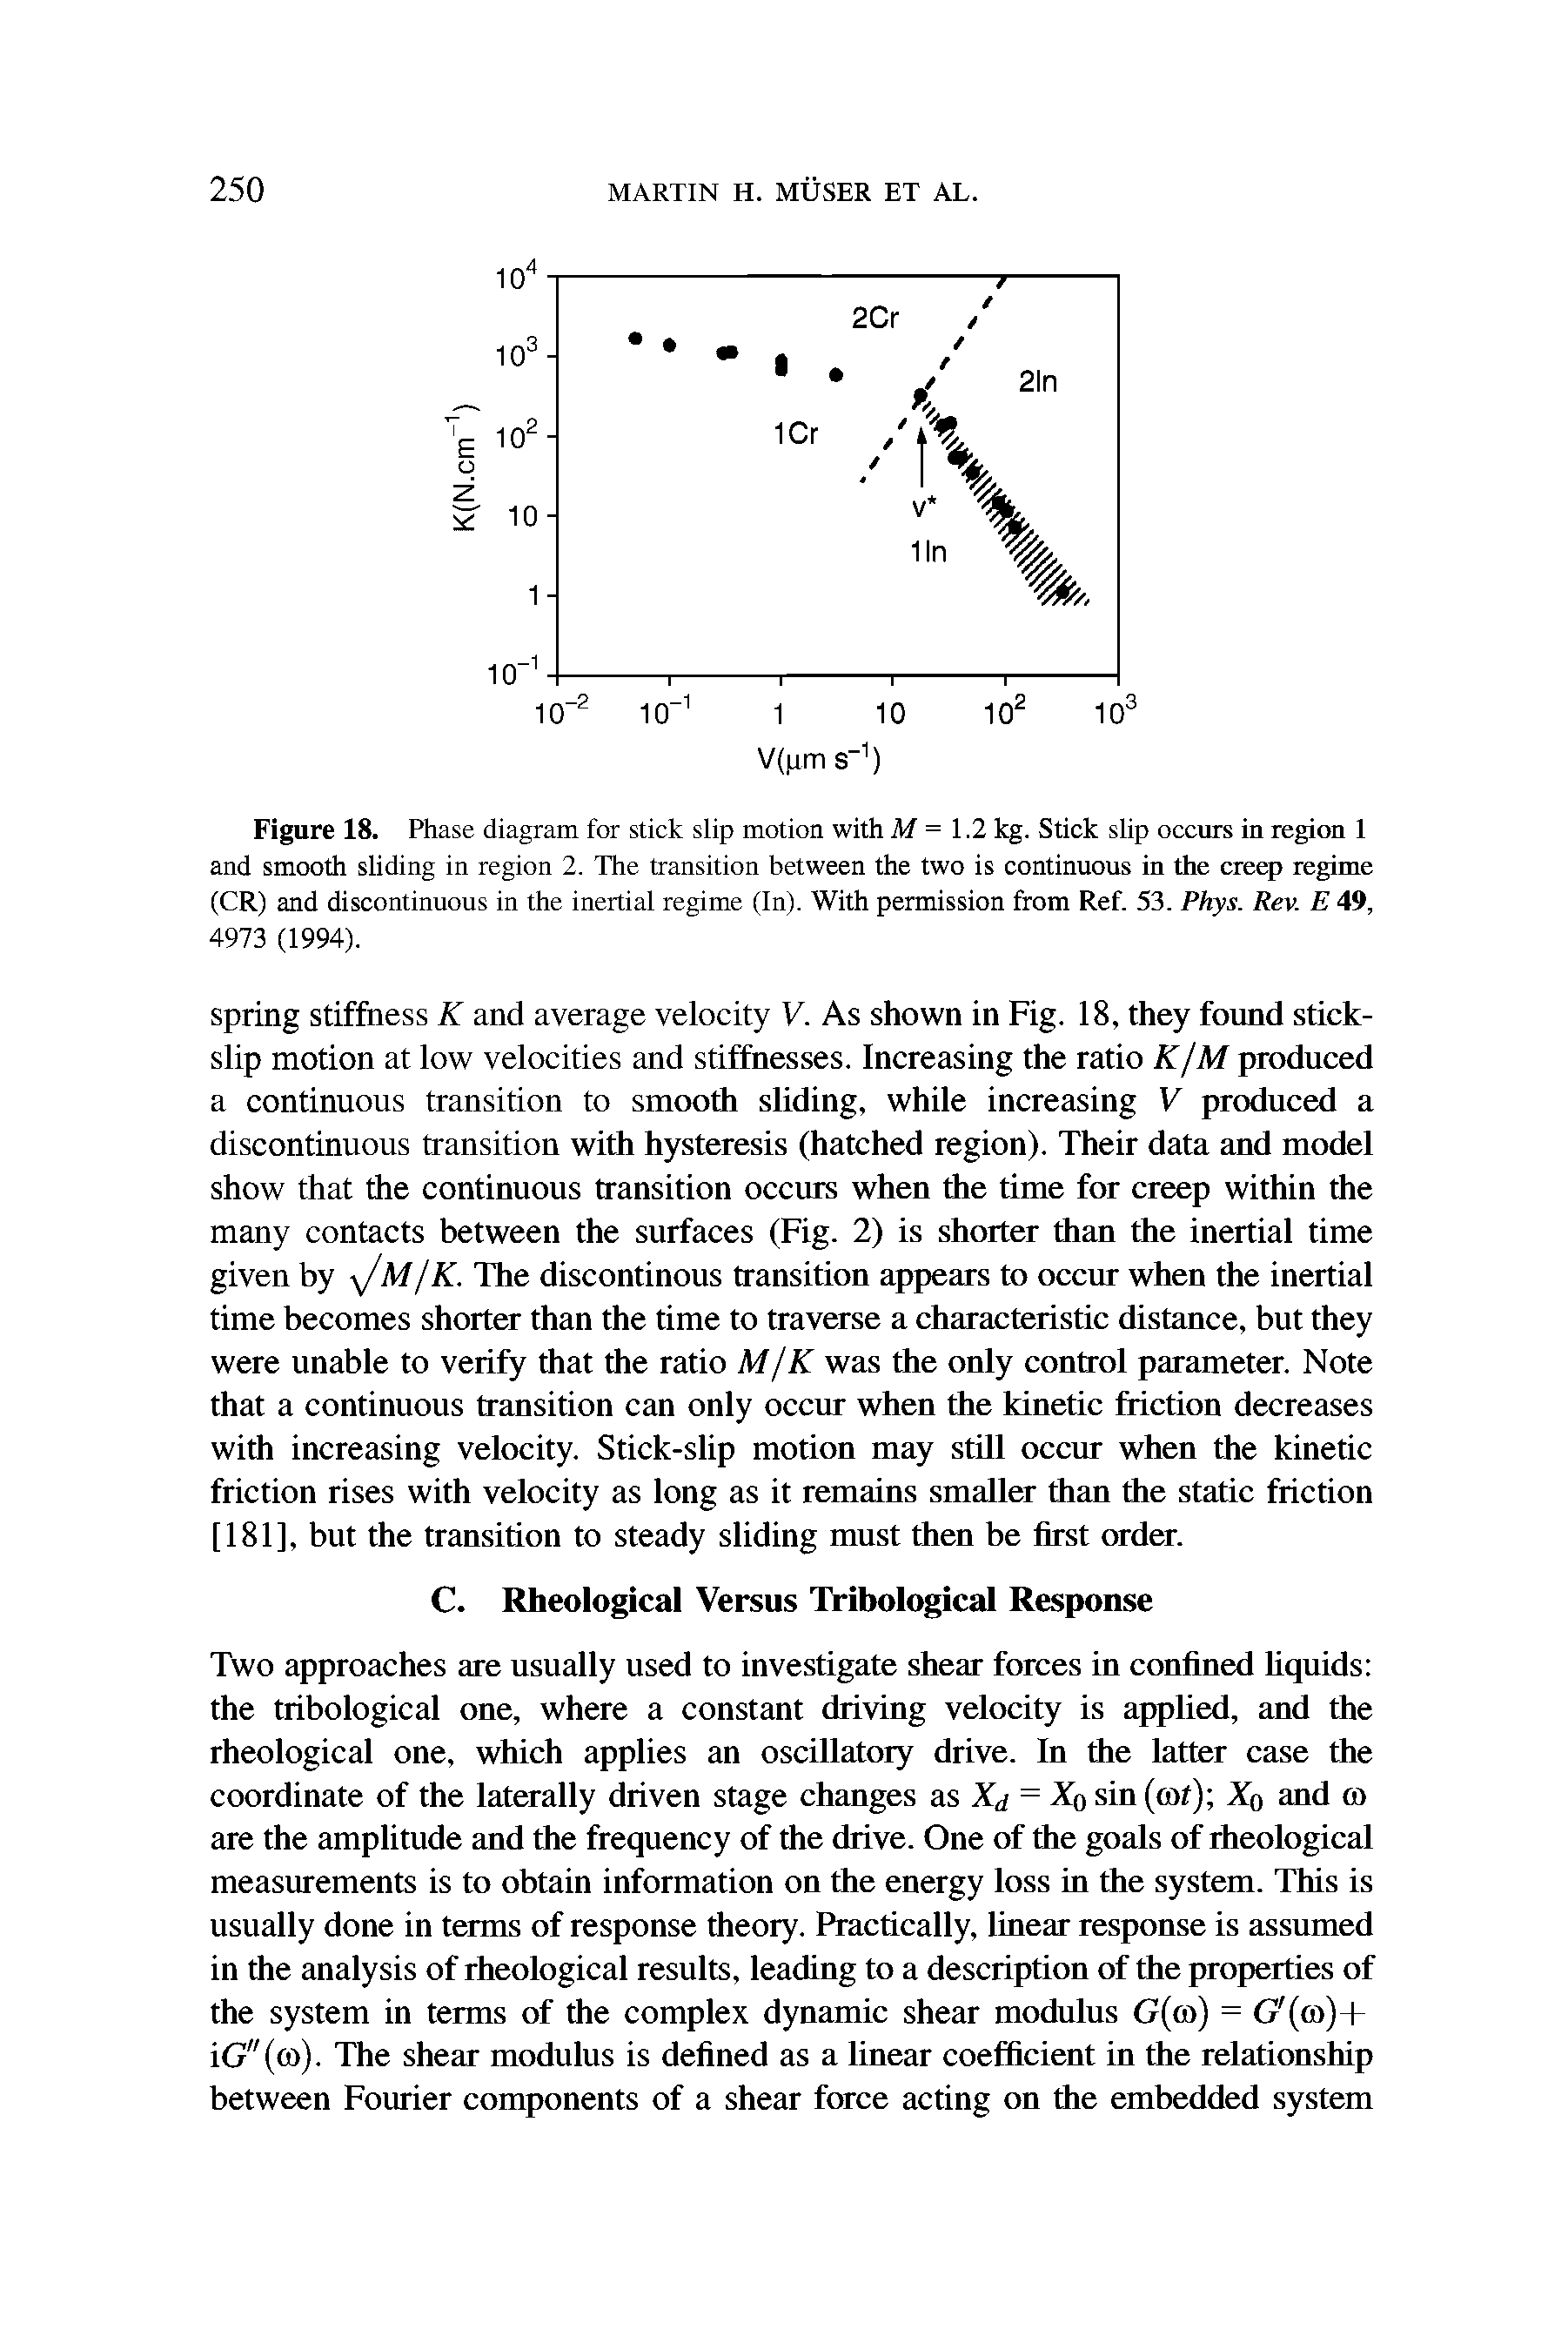 Figure 18. Phase diagram for stick slip motion with M = 1.2 kg. Stick slip occurs in region 1 and smooth sliding in region 2. The h ansition between the two is continuous in the creep regime (CR) and discontinuous in the inertial regime (Ini. With permission from Ref, 53. Phys. Rev. E 49, 4973 (1994).